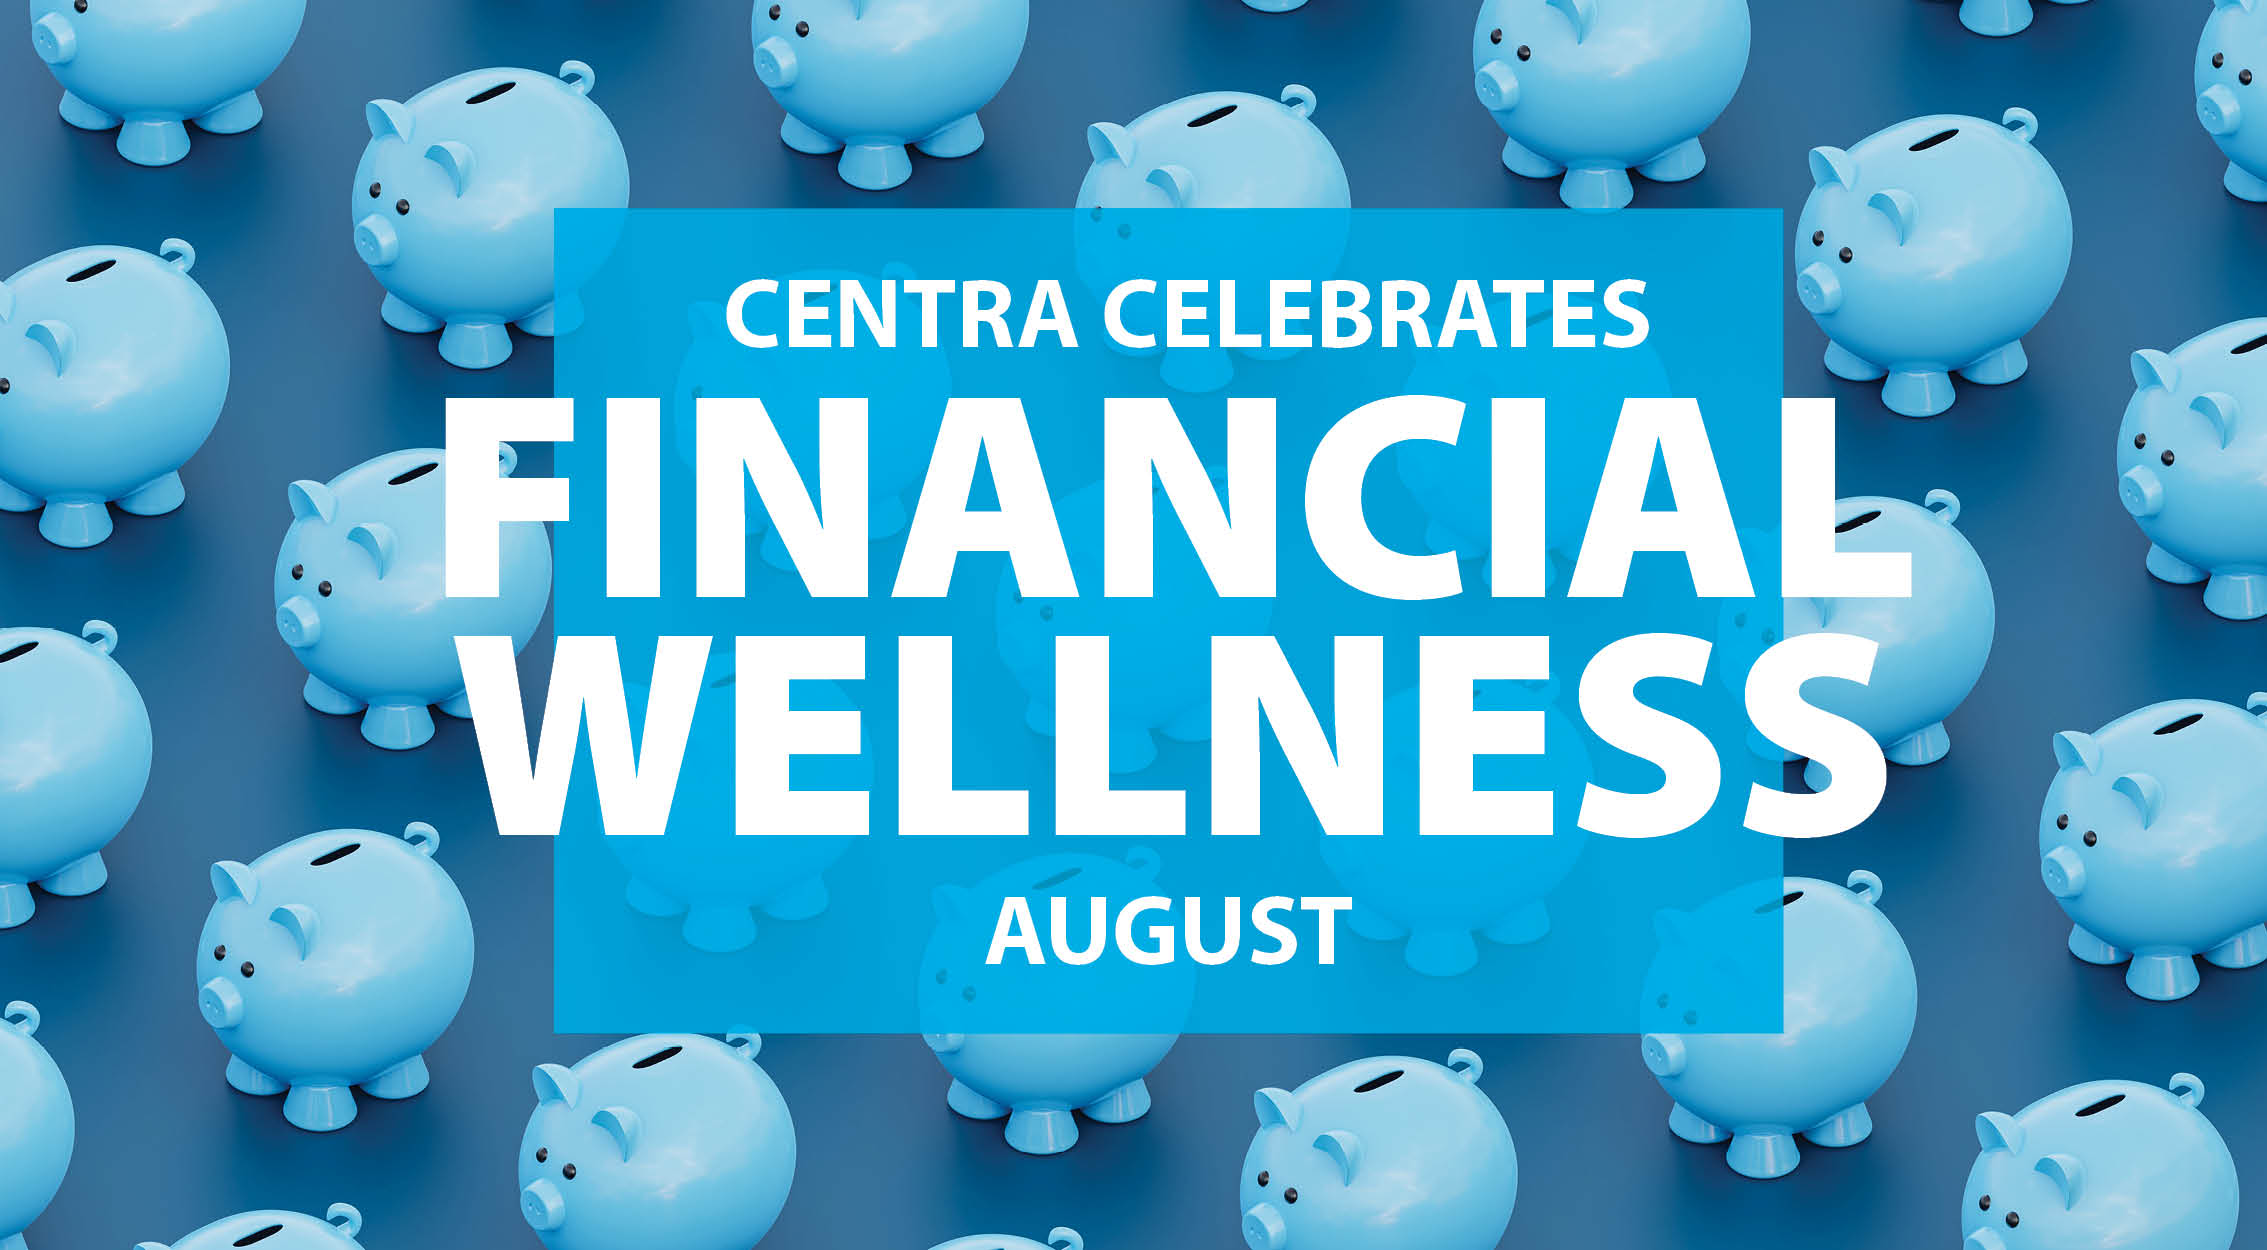 Centra celebrates financial wellness the month of August.